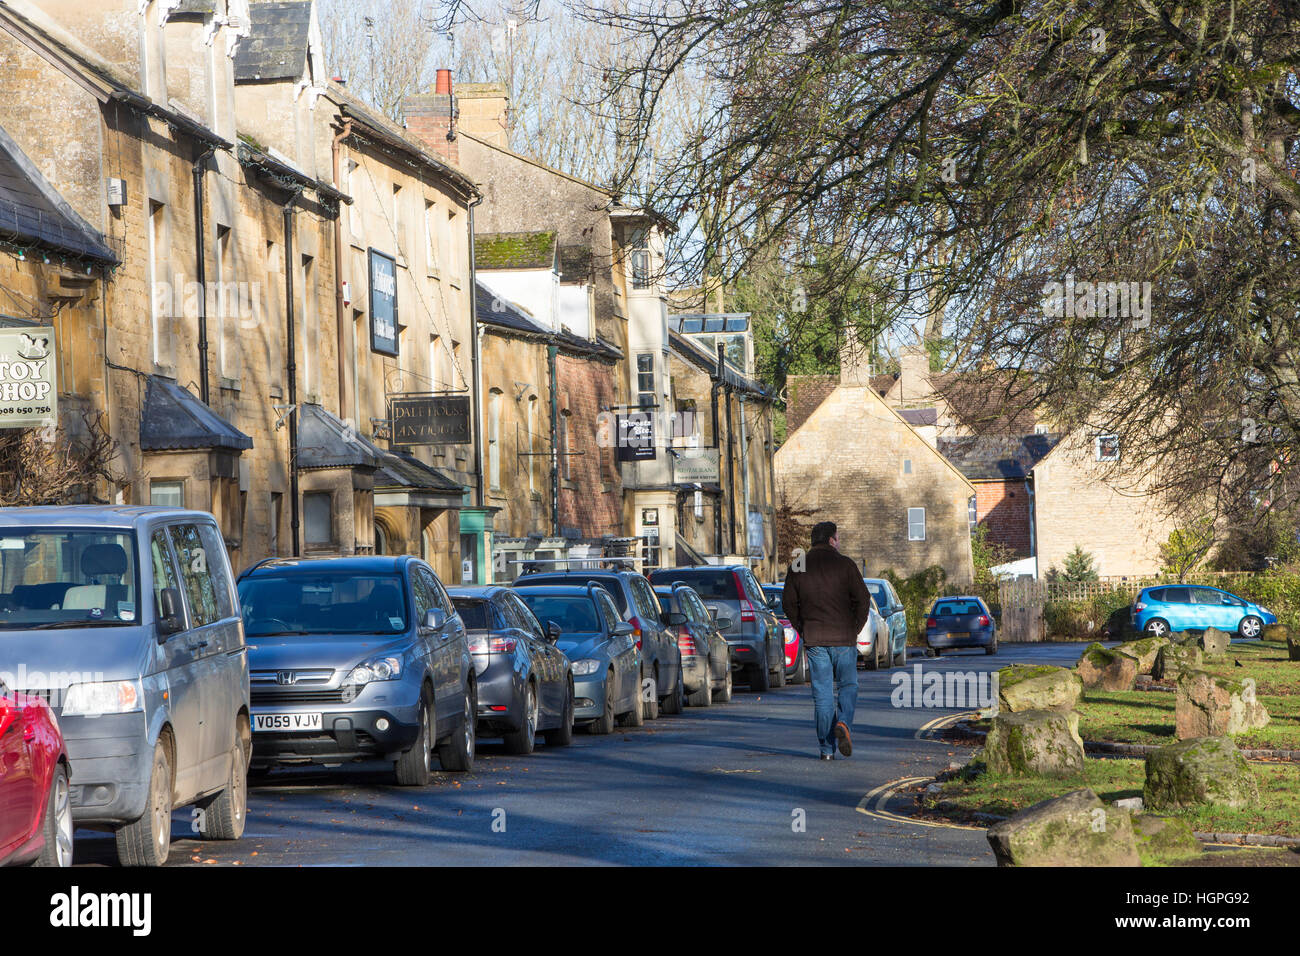 High street of village Moreton-in-Marsh a town civil parish in the cotswolds in northeastern Gloucestershire, England Stock Photo